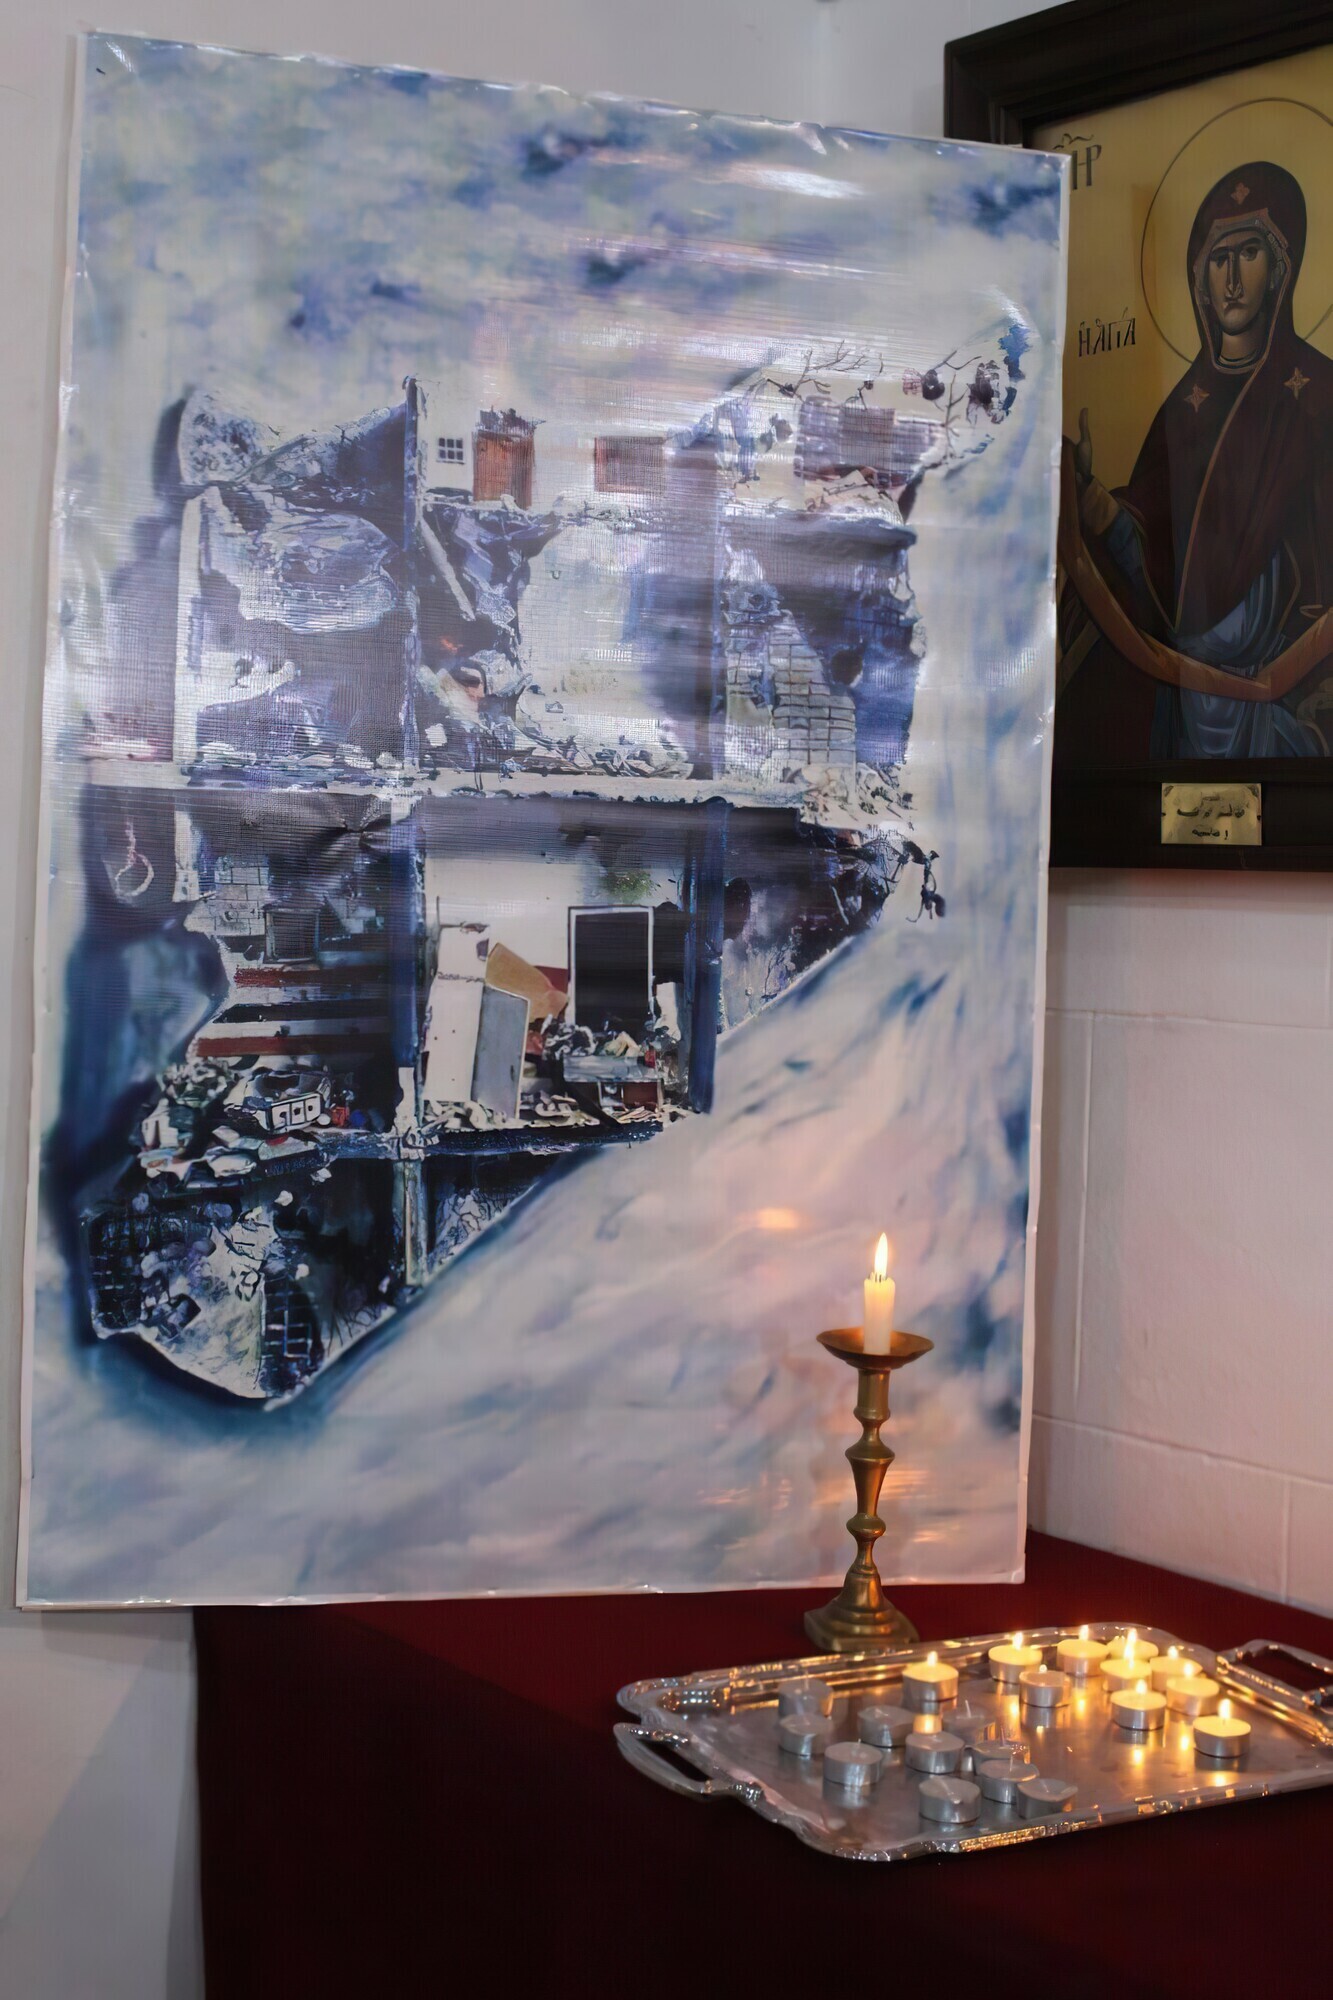 Artwork and candles in a church